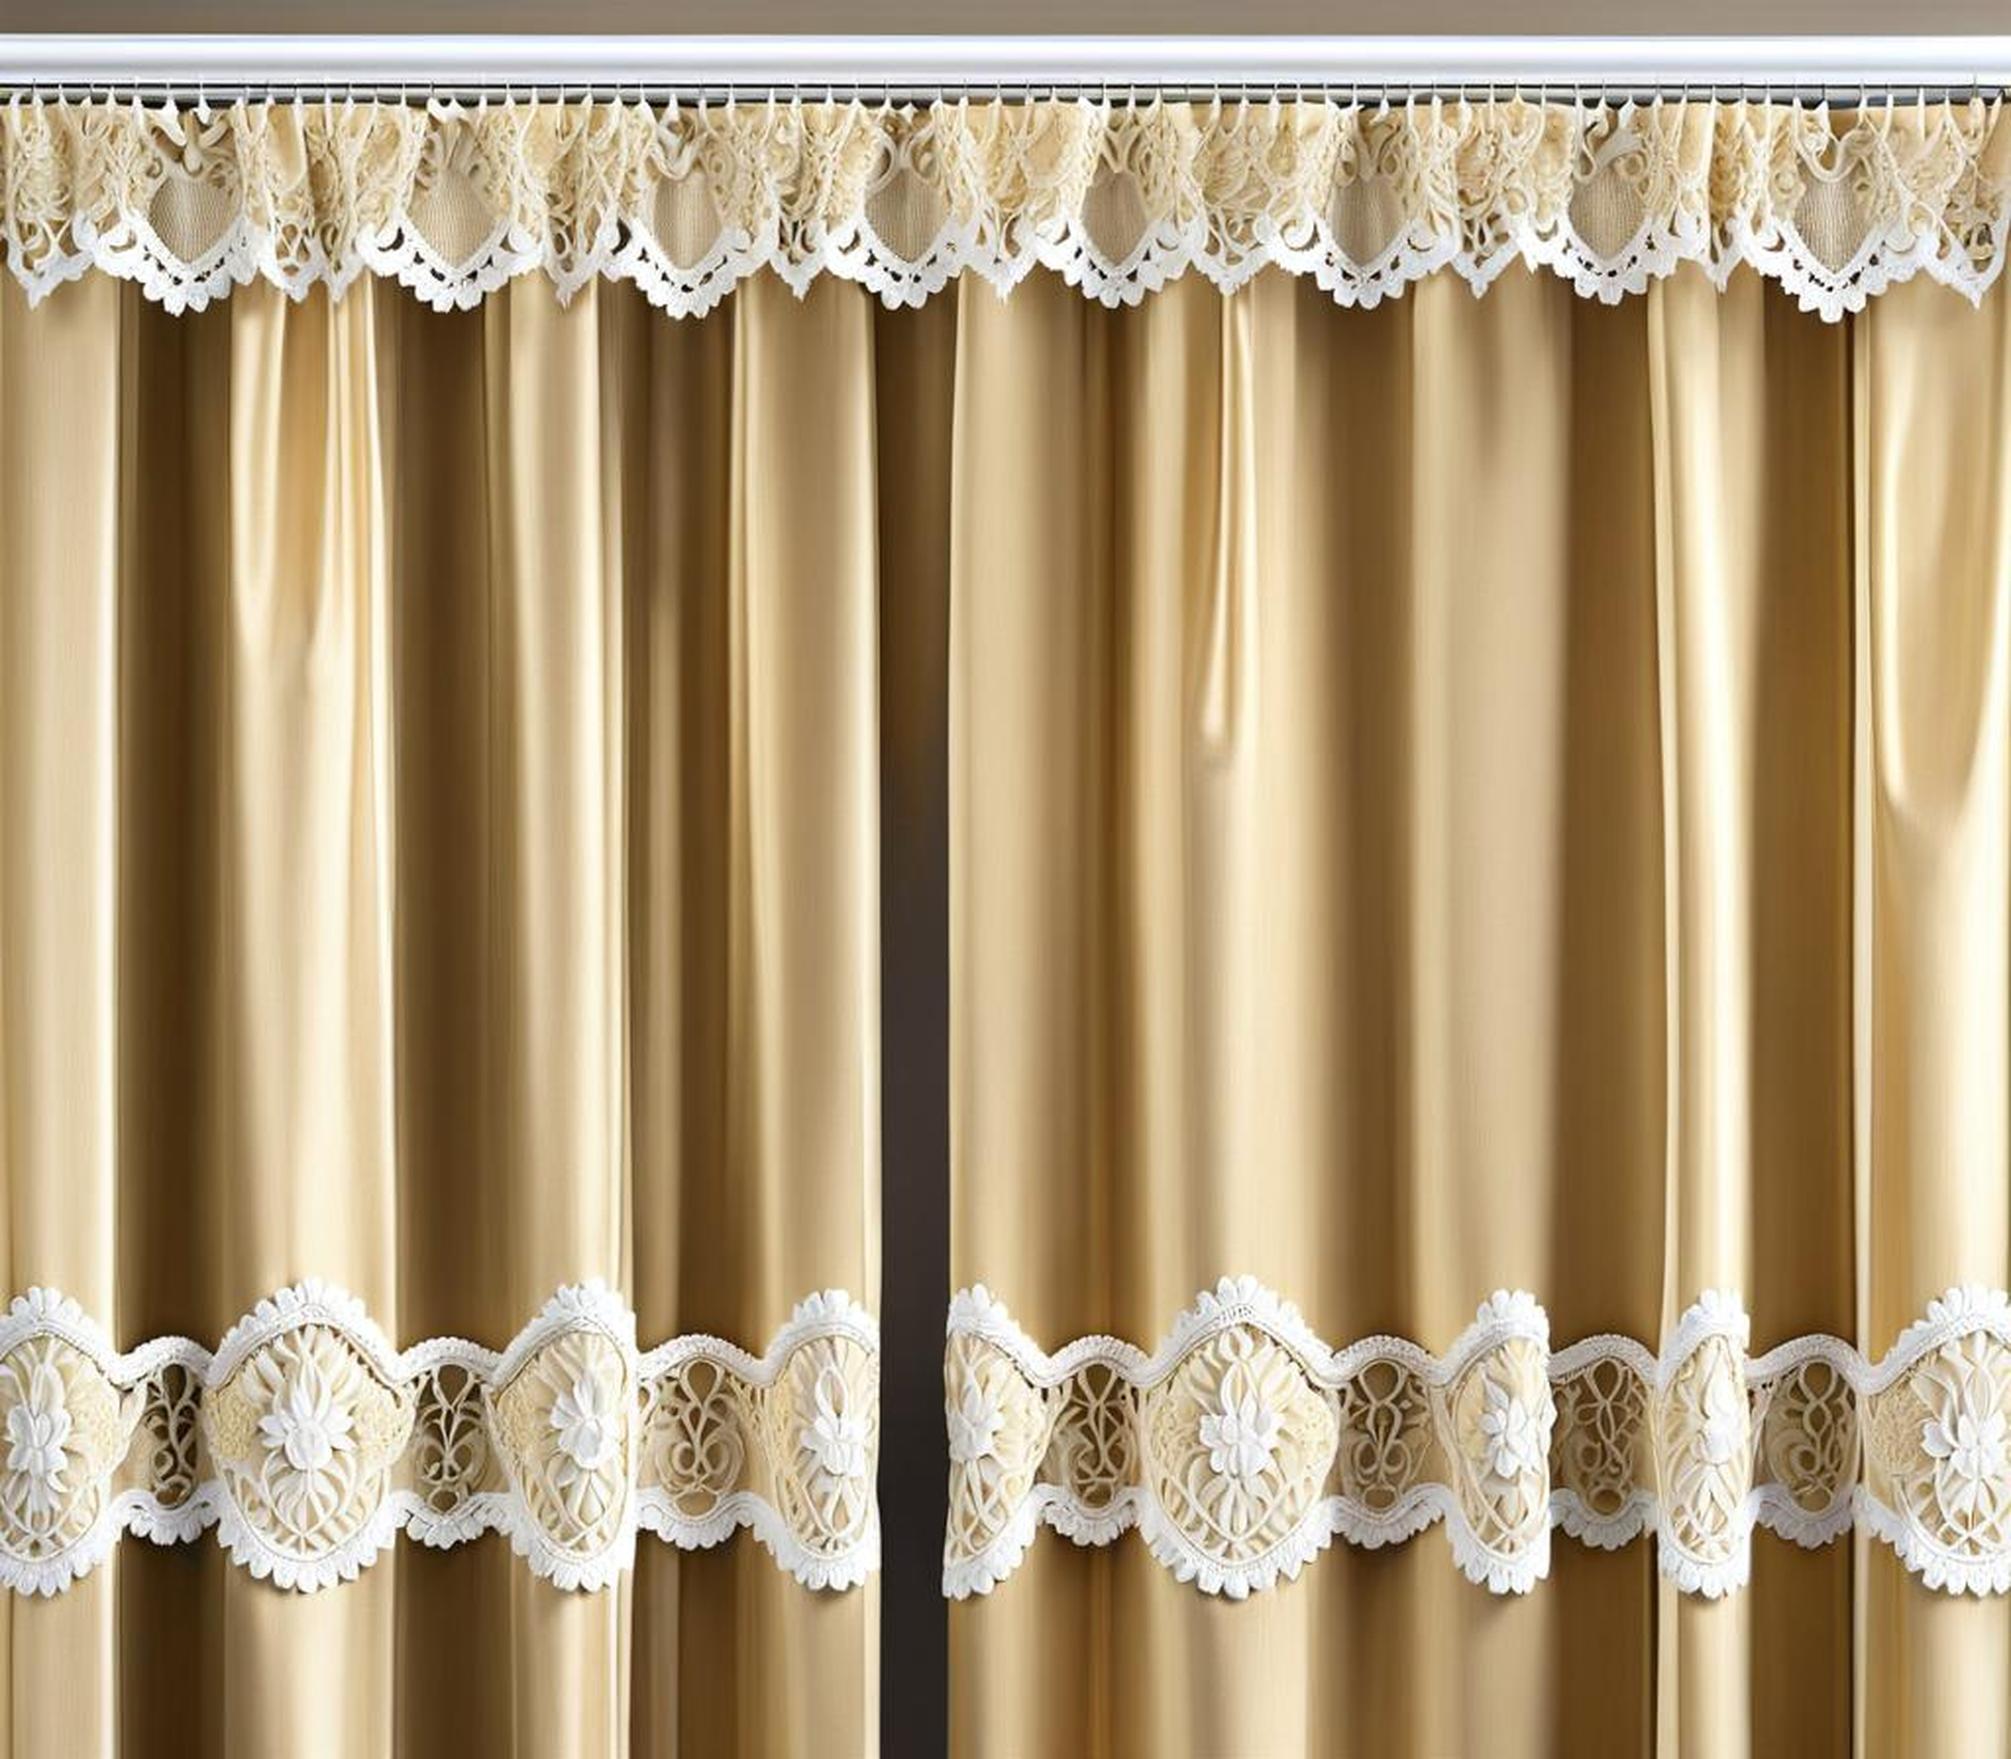 lace cafe curtains with valance